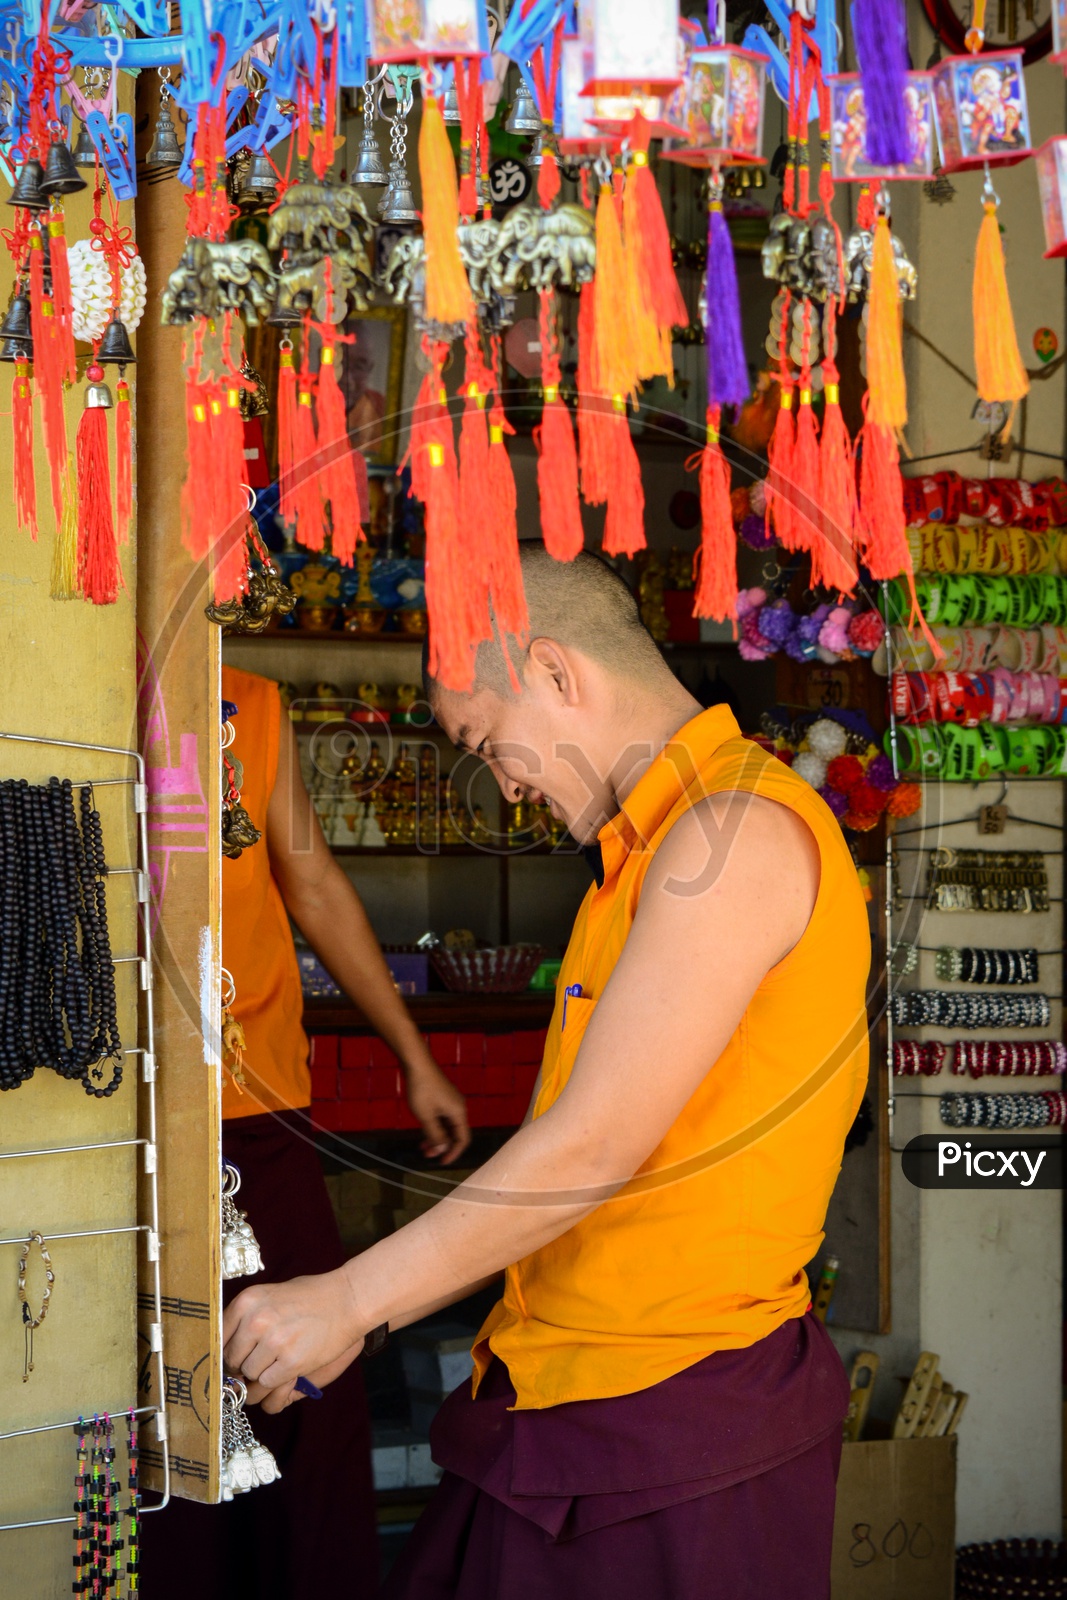 A buddhist monk checking out souvenirs at a shop.